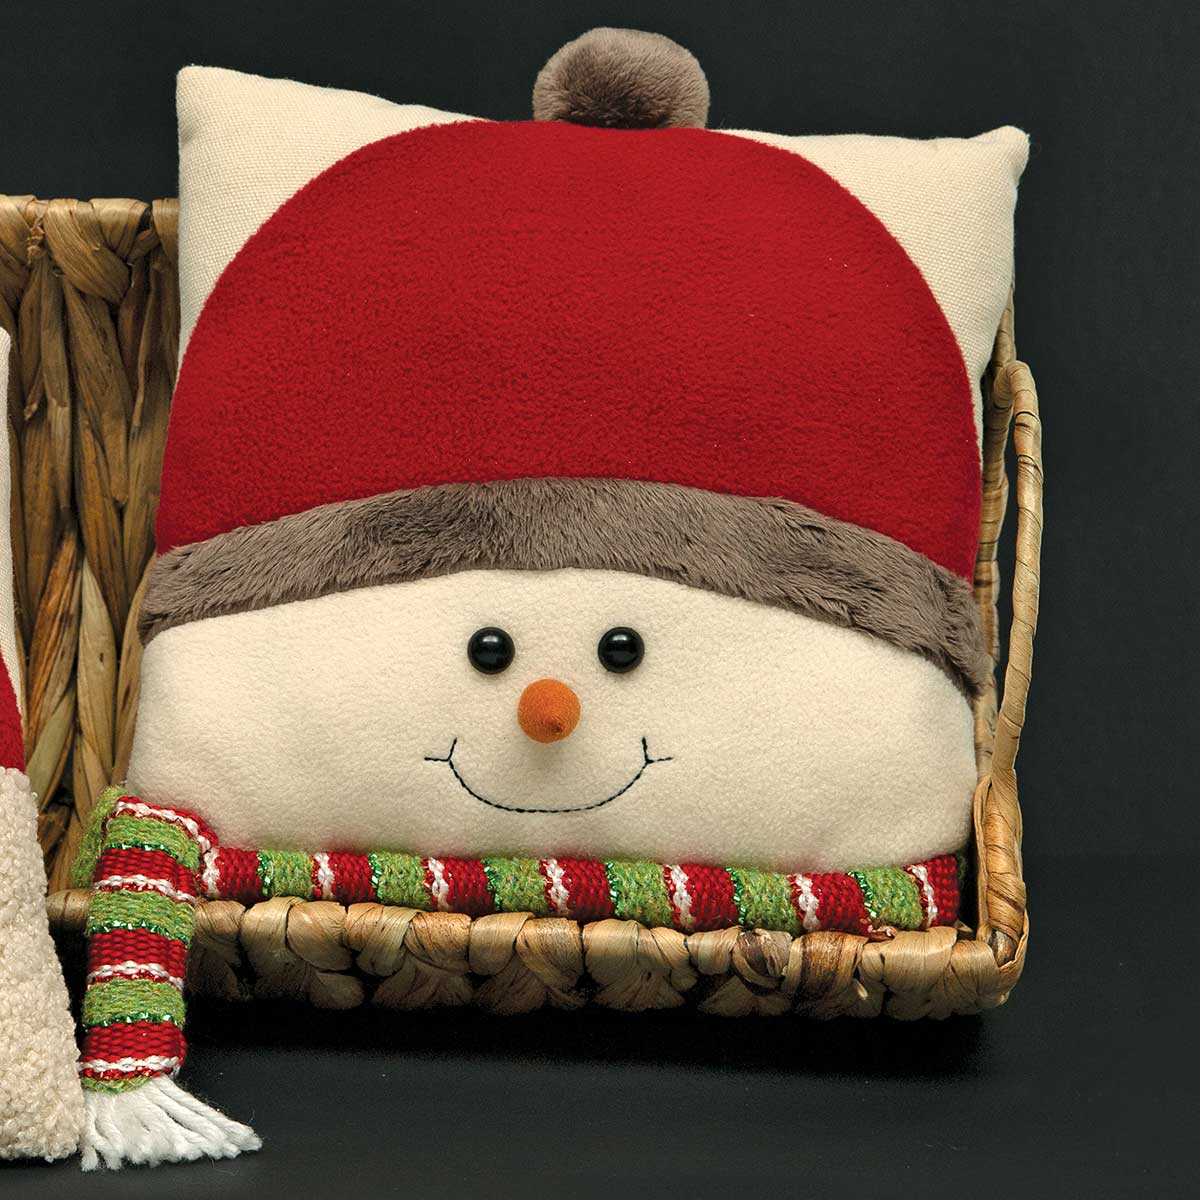 SNOWMAN FACE PILLOW CREAM/RED/GREEN WITH POM-POM